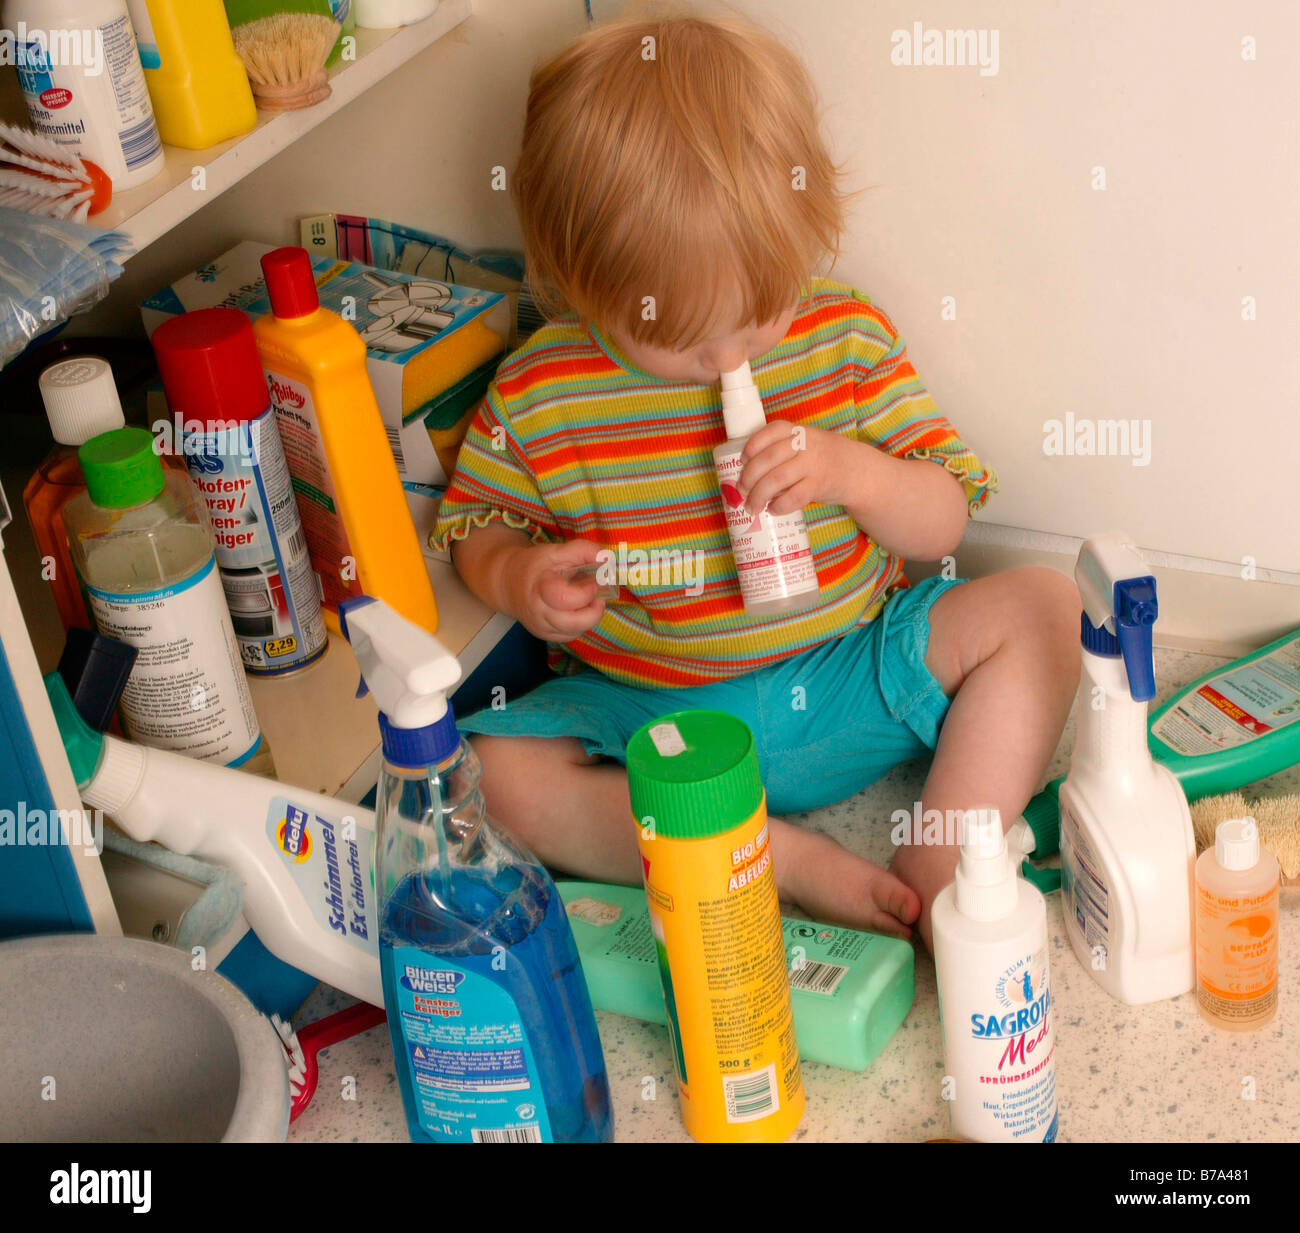 Toddler playing with cleaning agents Stock Photo